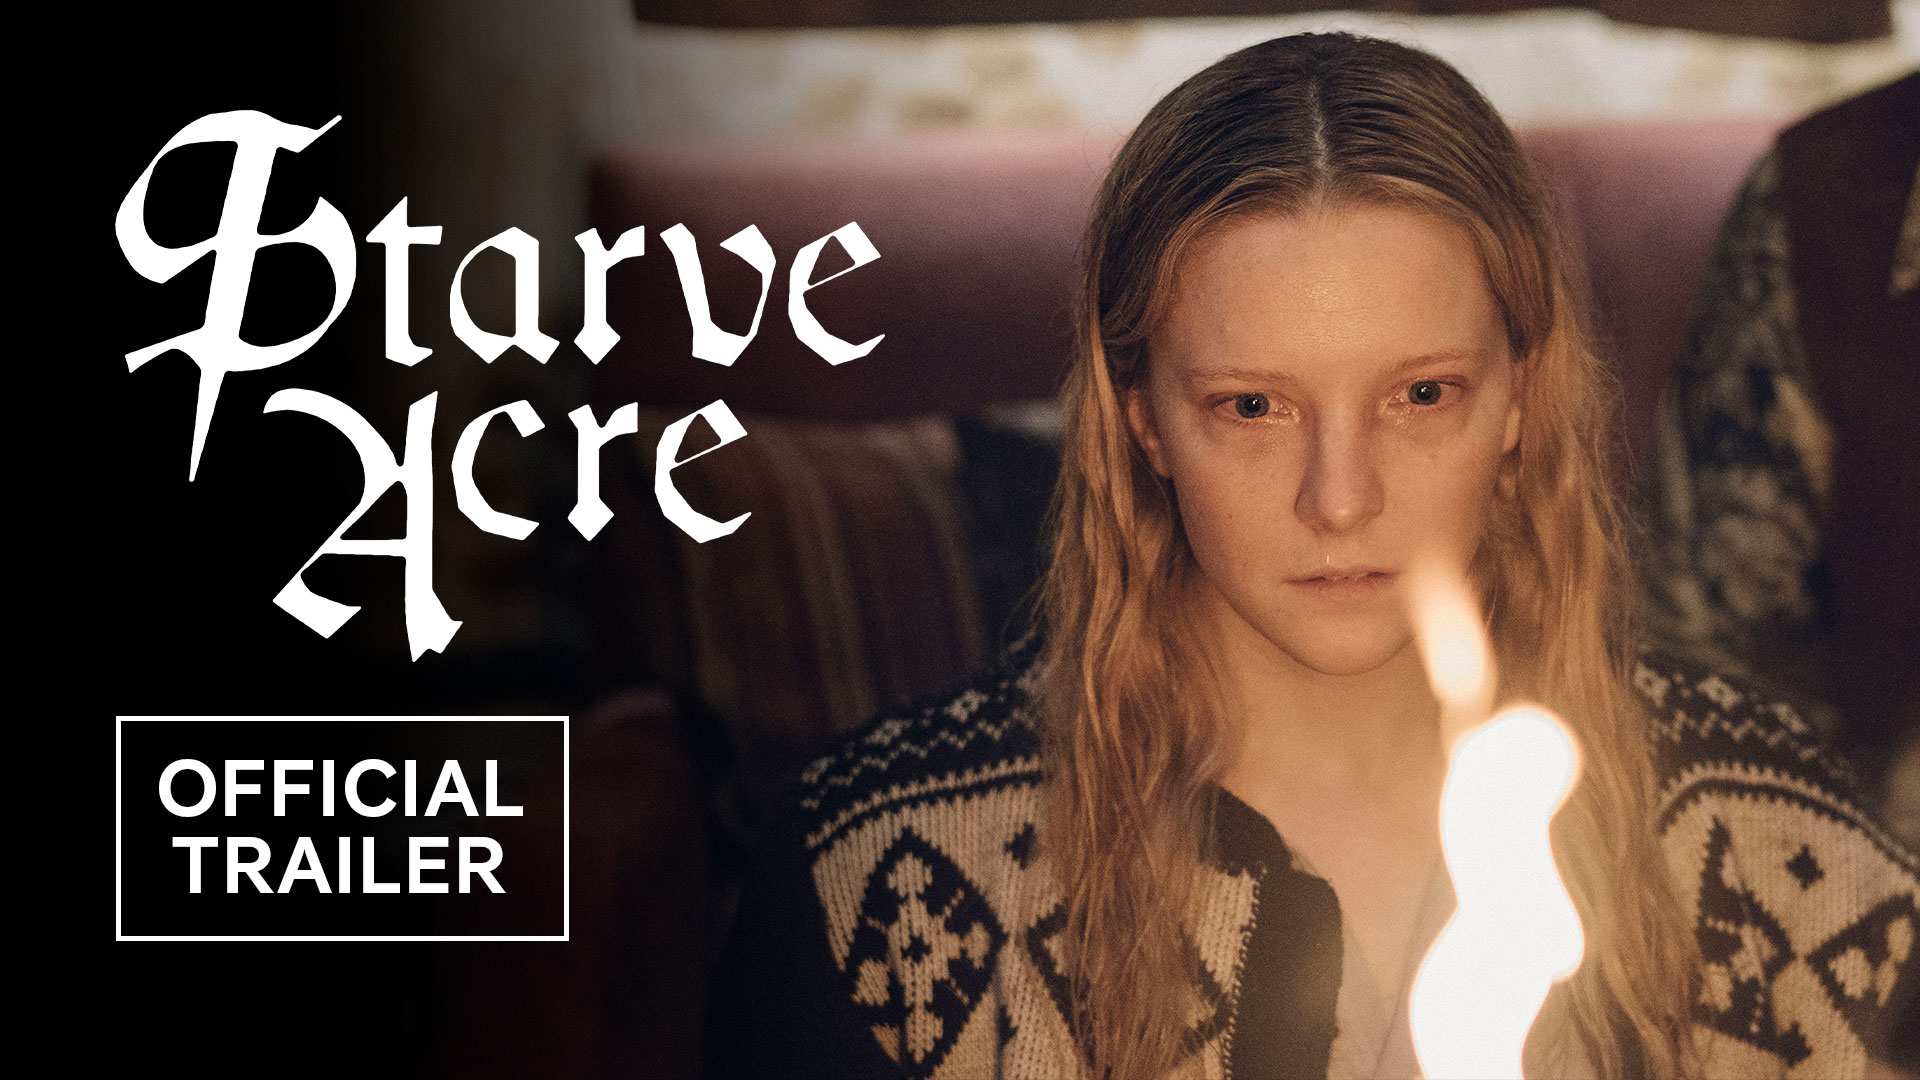 Starve Acre Trailer Sees Matt Smith and Morfydd Clark Face Ancient Evil